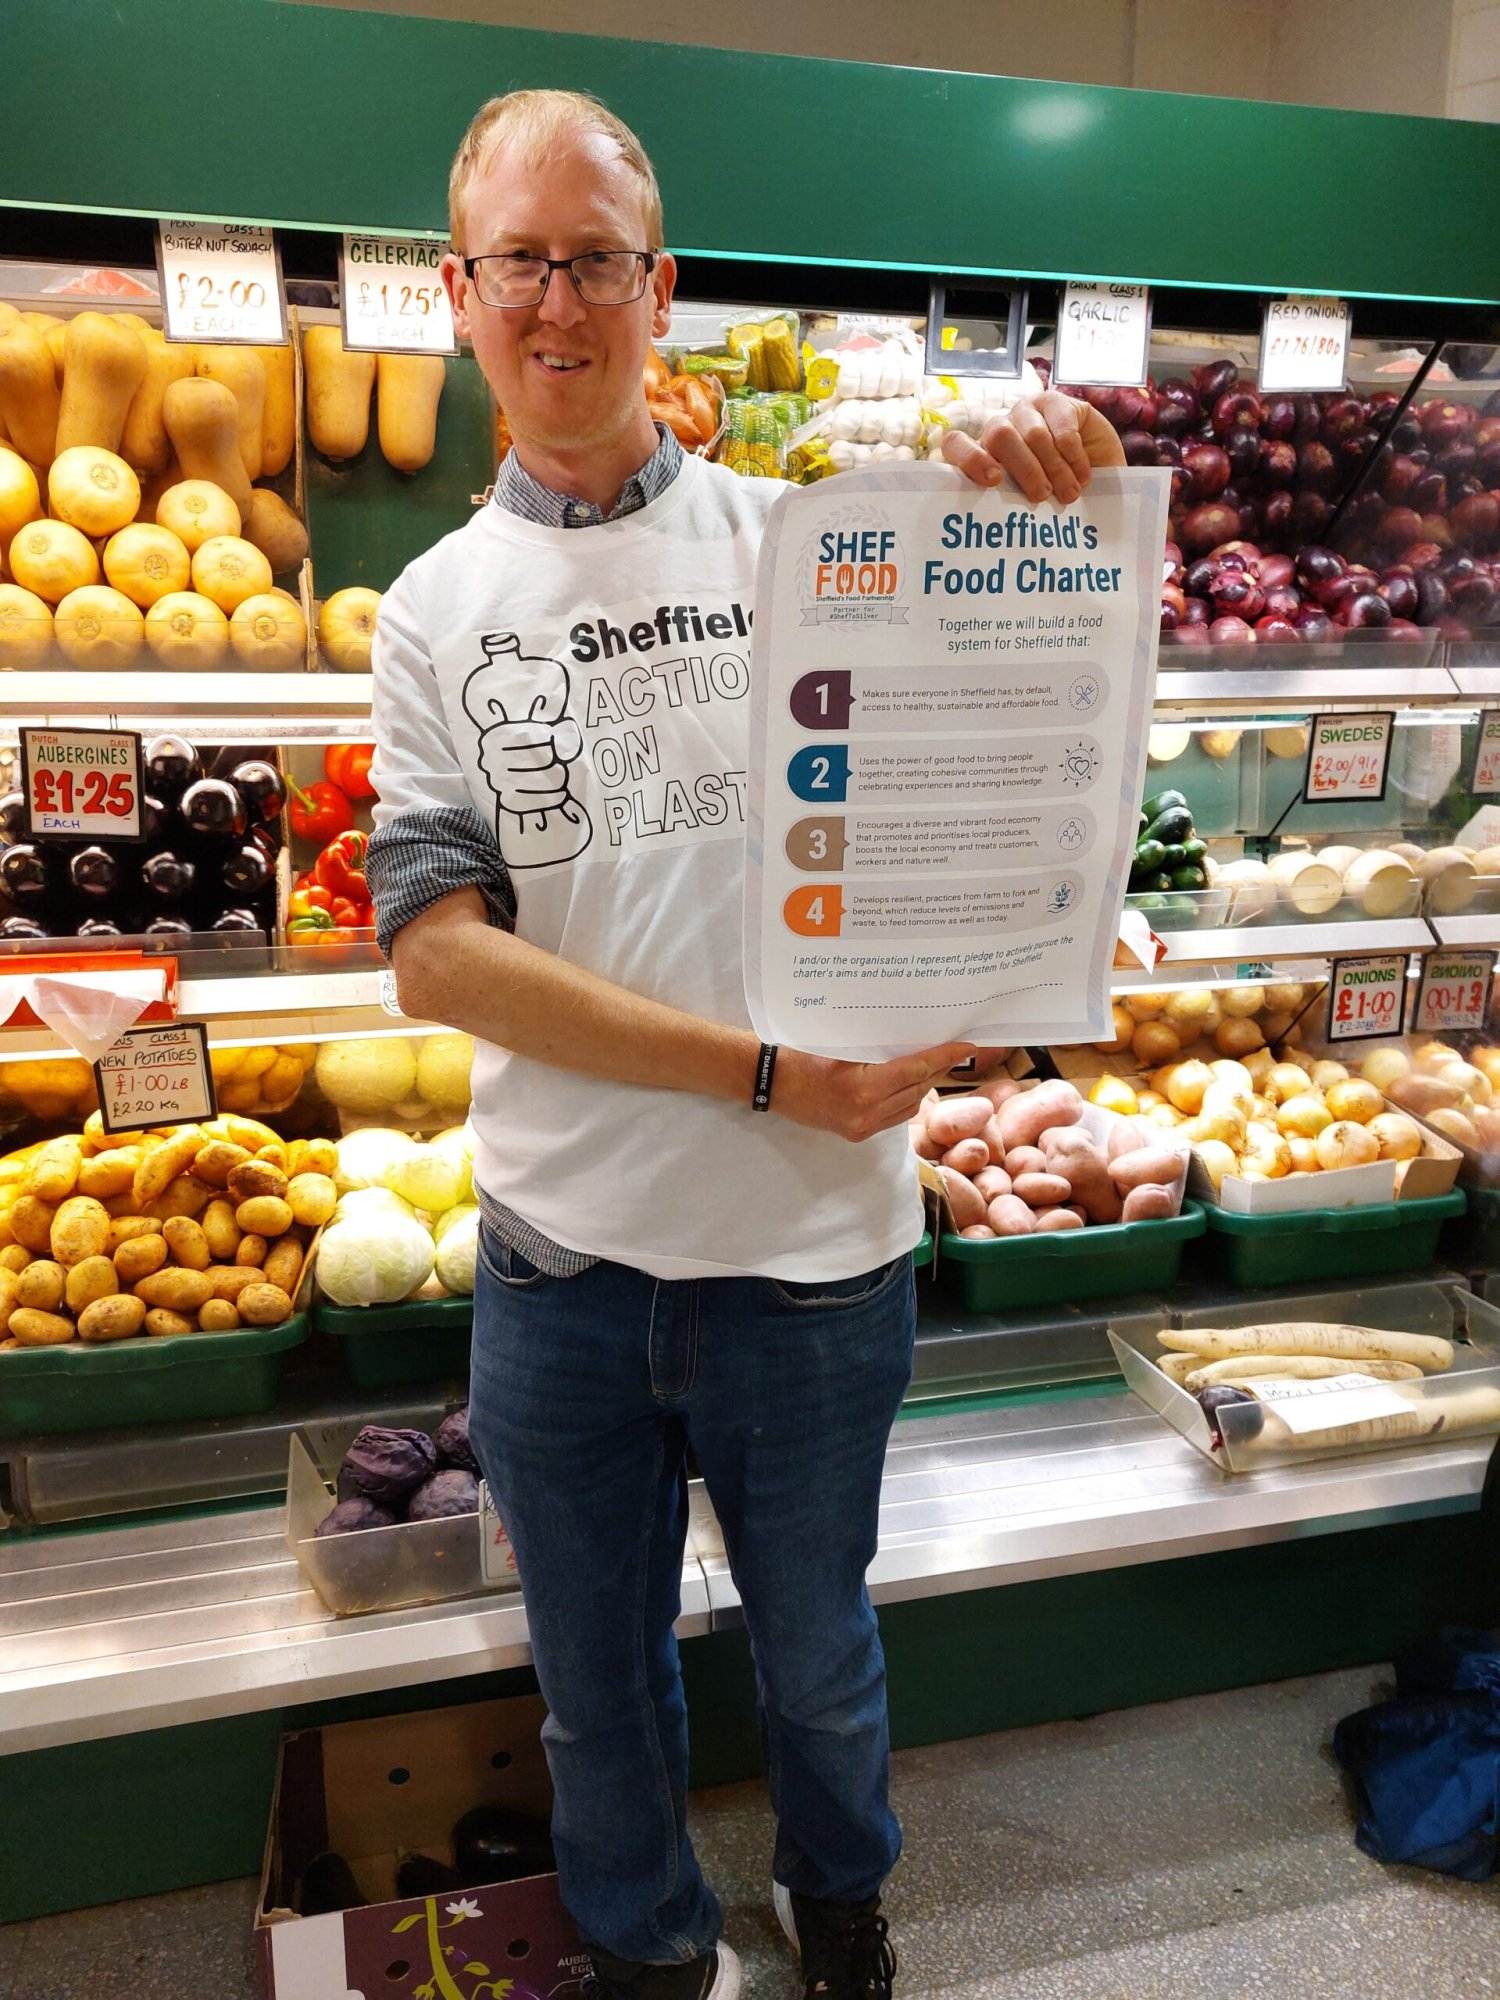 Sheffield Action on Plastic signs the Sheffield Food Charter